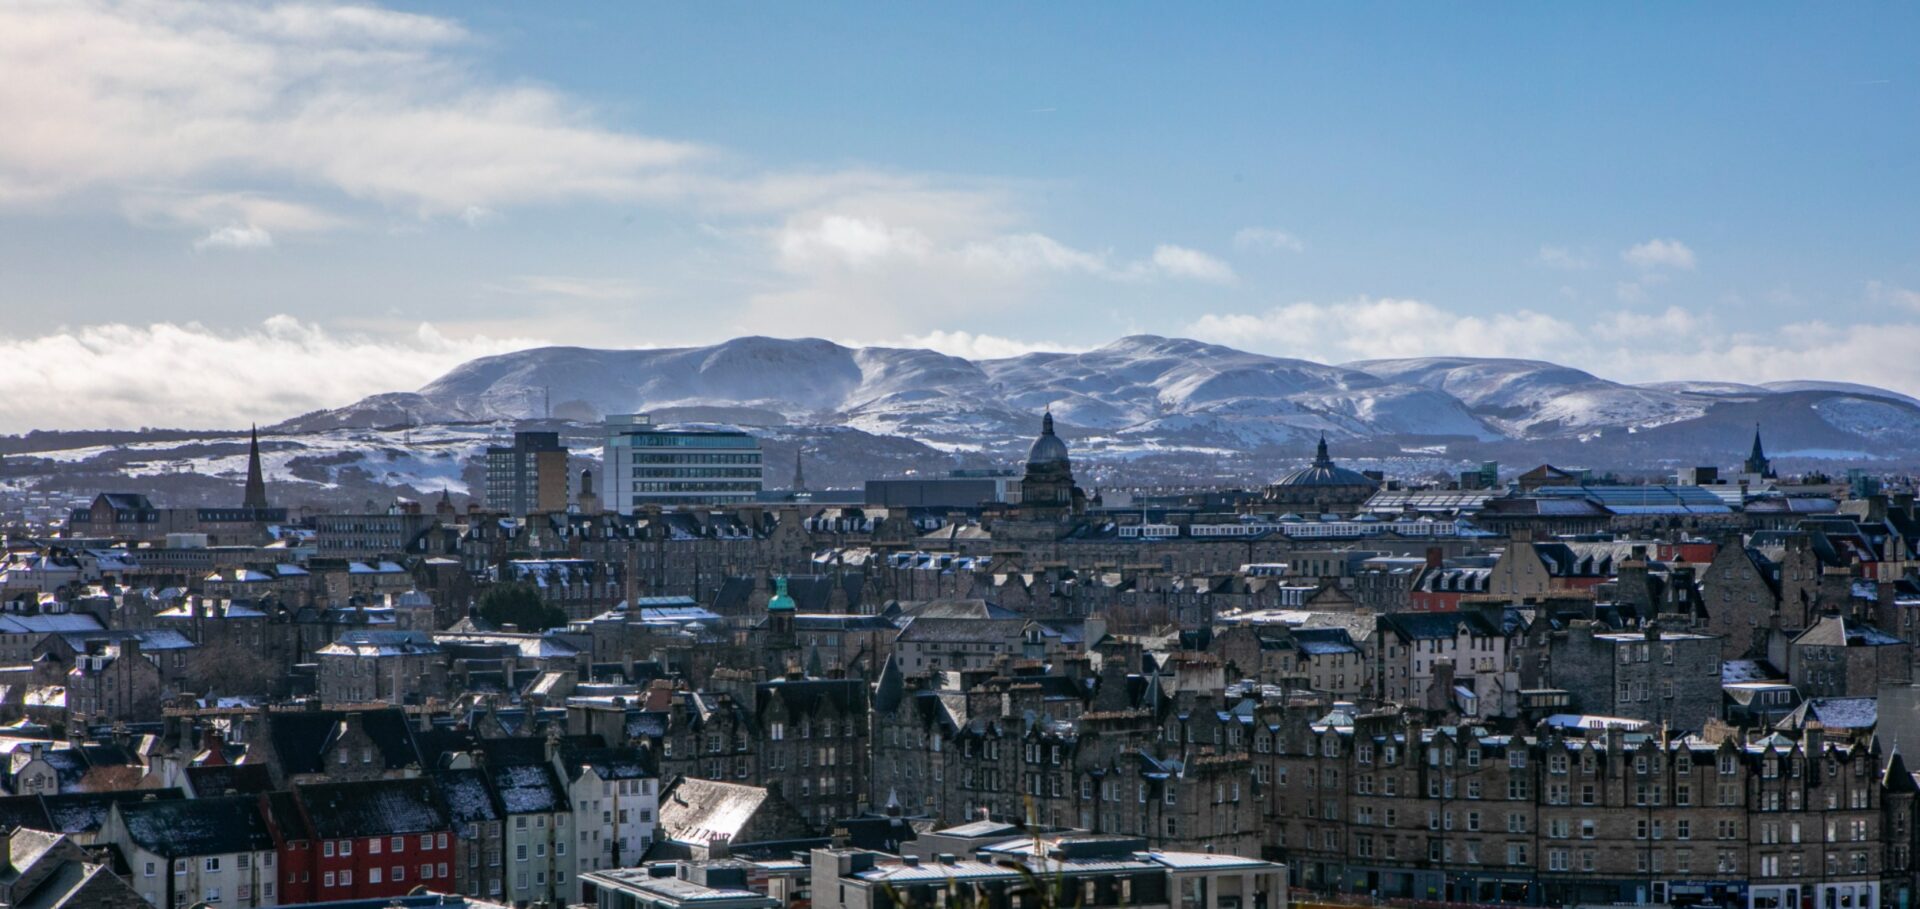 Old town with Pentlands and snow